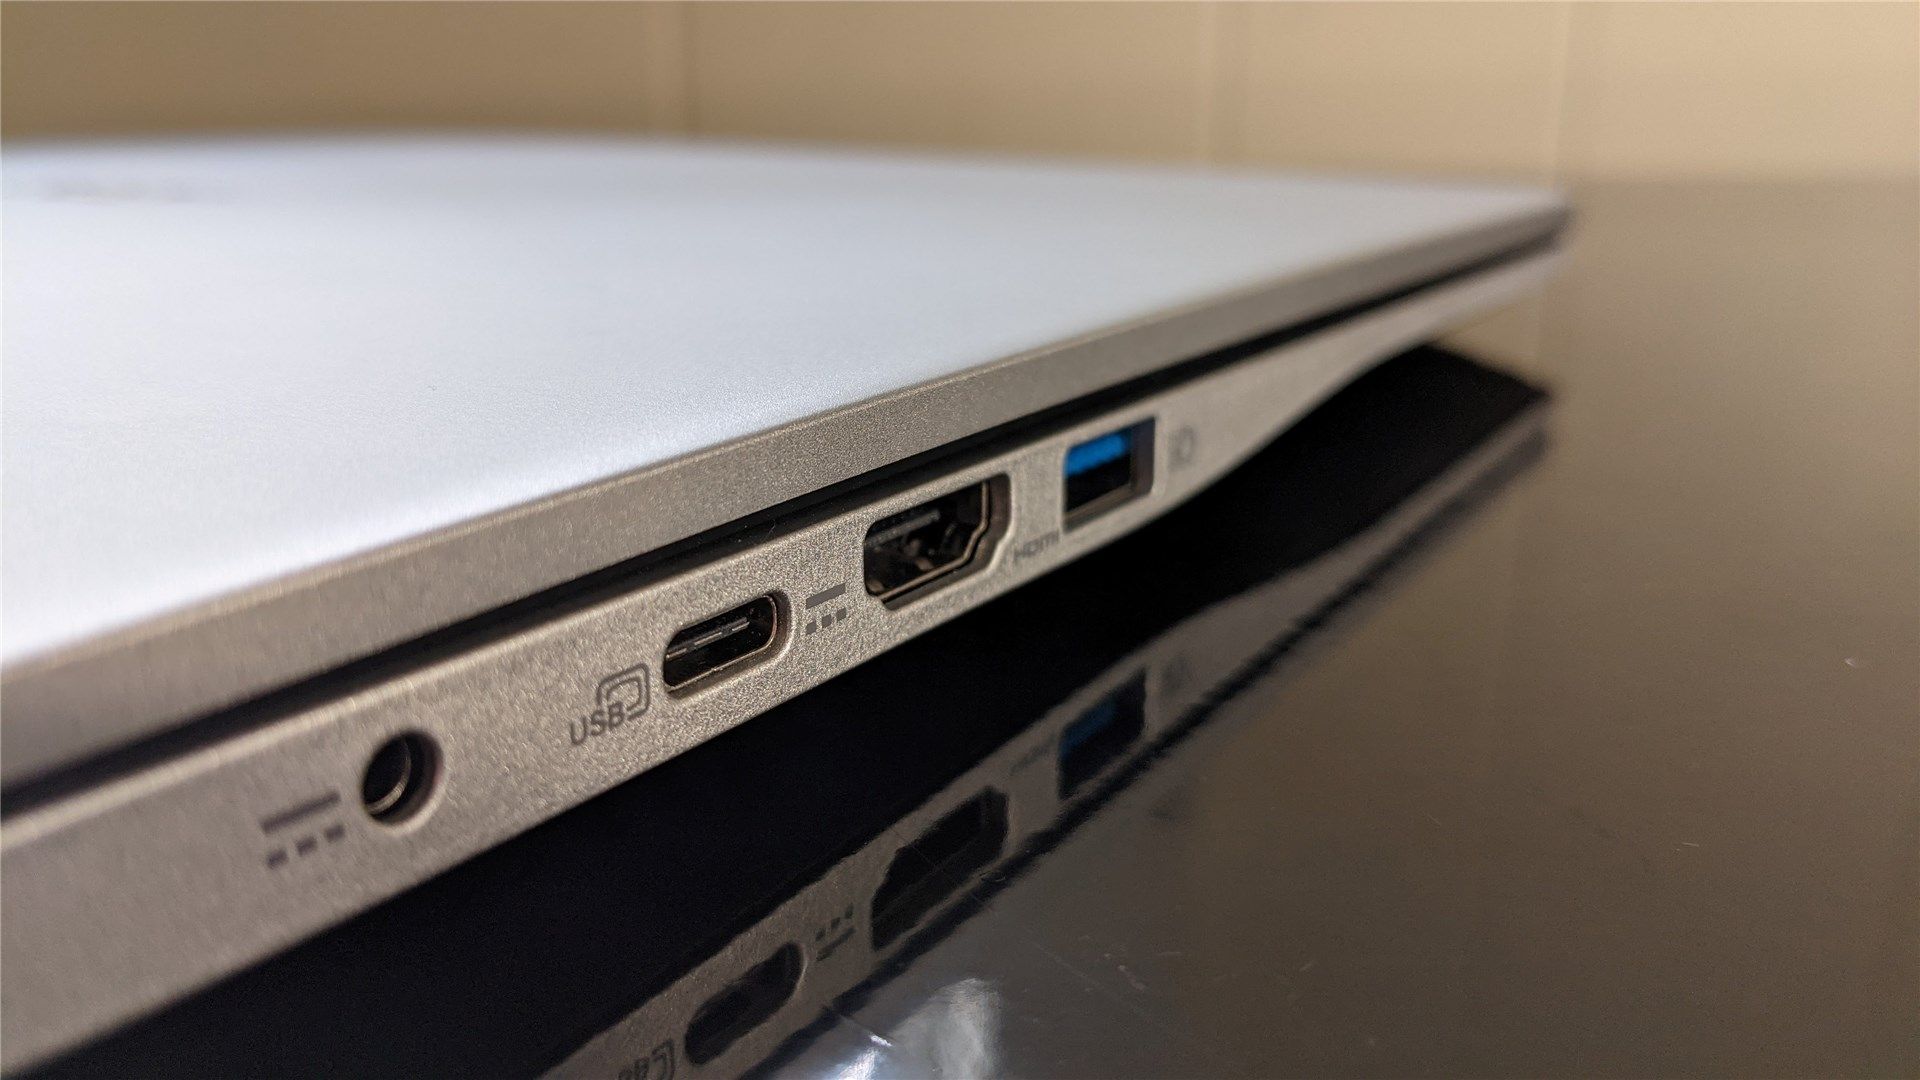 The ports on the left side of the laptop: barrel, usb-c, hdmi, and usb-a 3.0